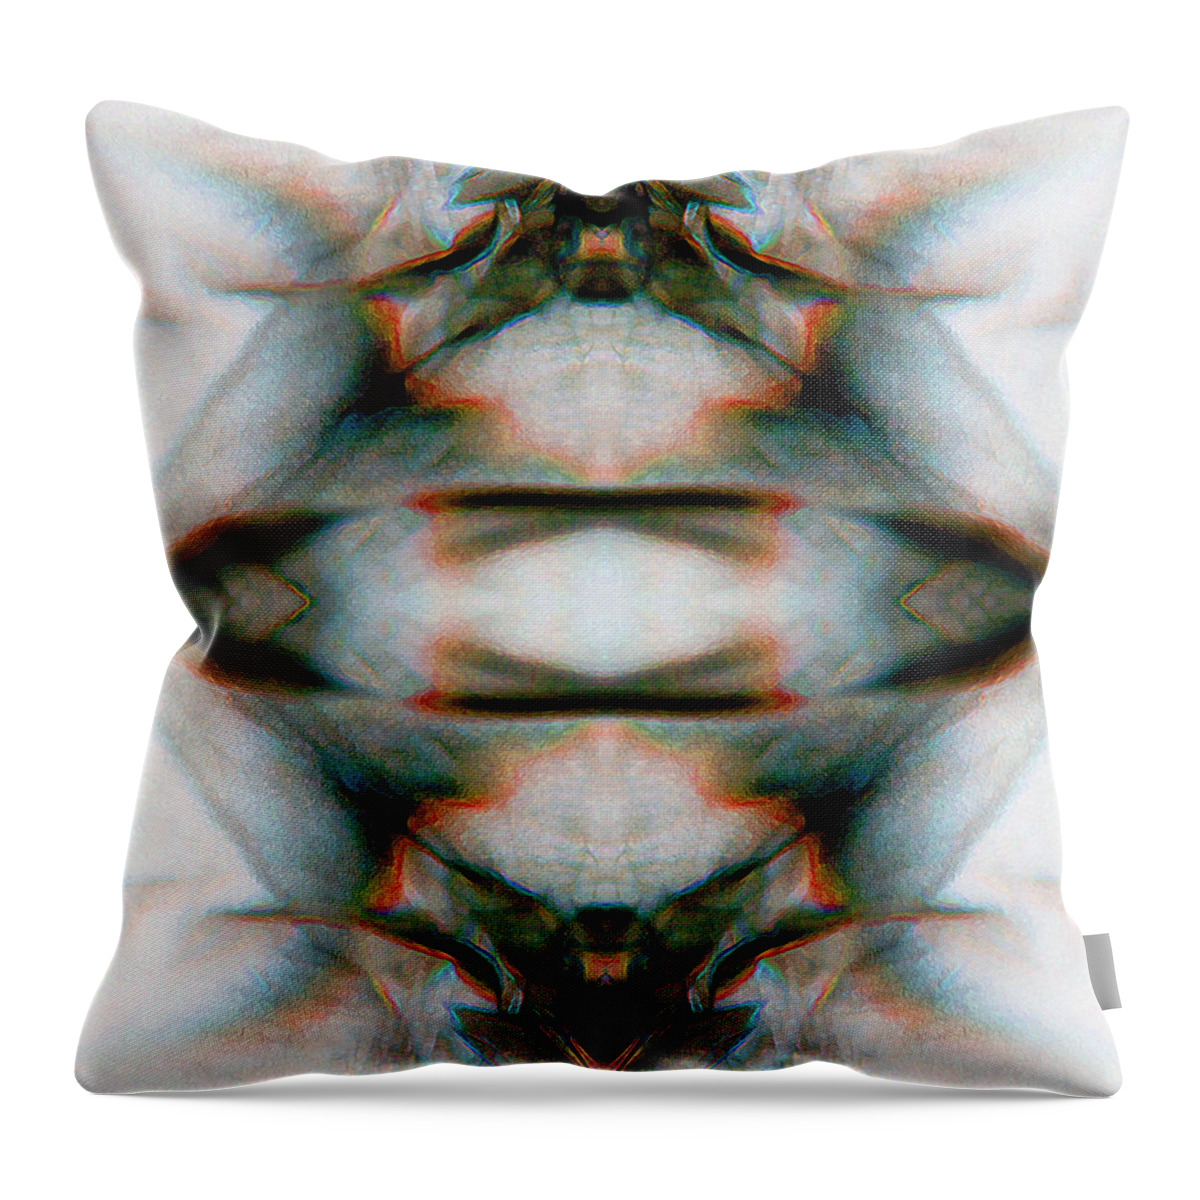 Digital Throw Pillow featuring the digital art Blanket_0022 by Alex W McDonell